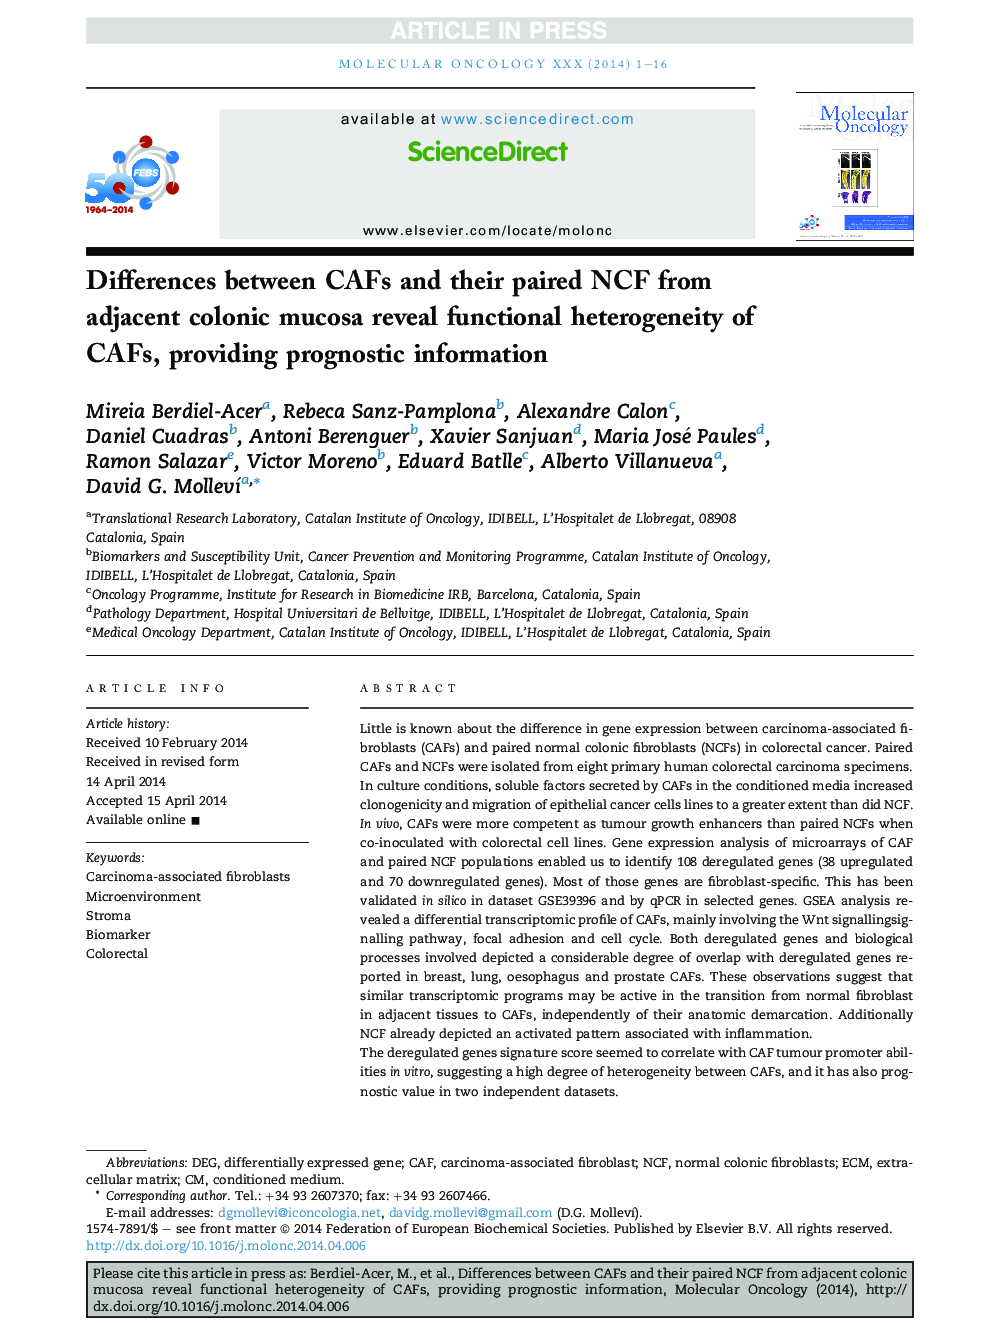 Differences between CAFs and their paired NCF from adjacent colonic mucosa reveal functional heterogeneity of CAFs, providing prognostic information